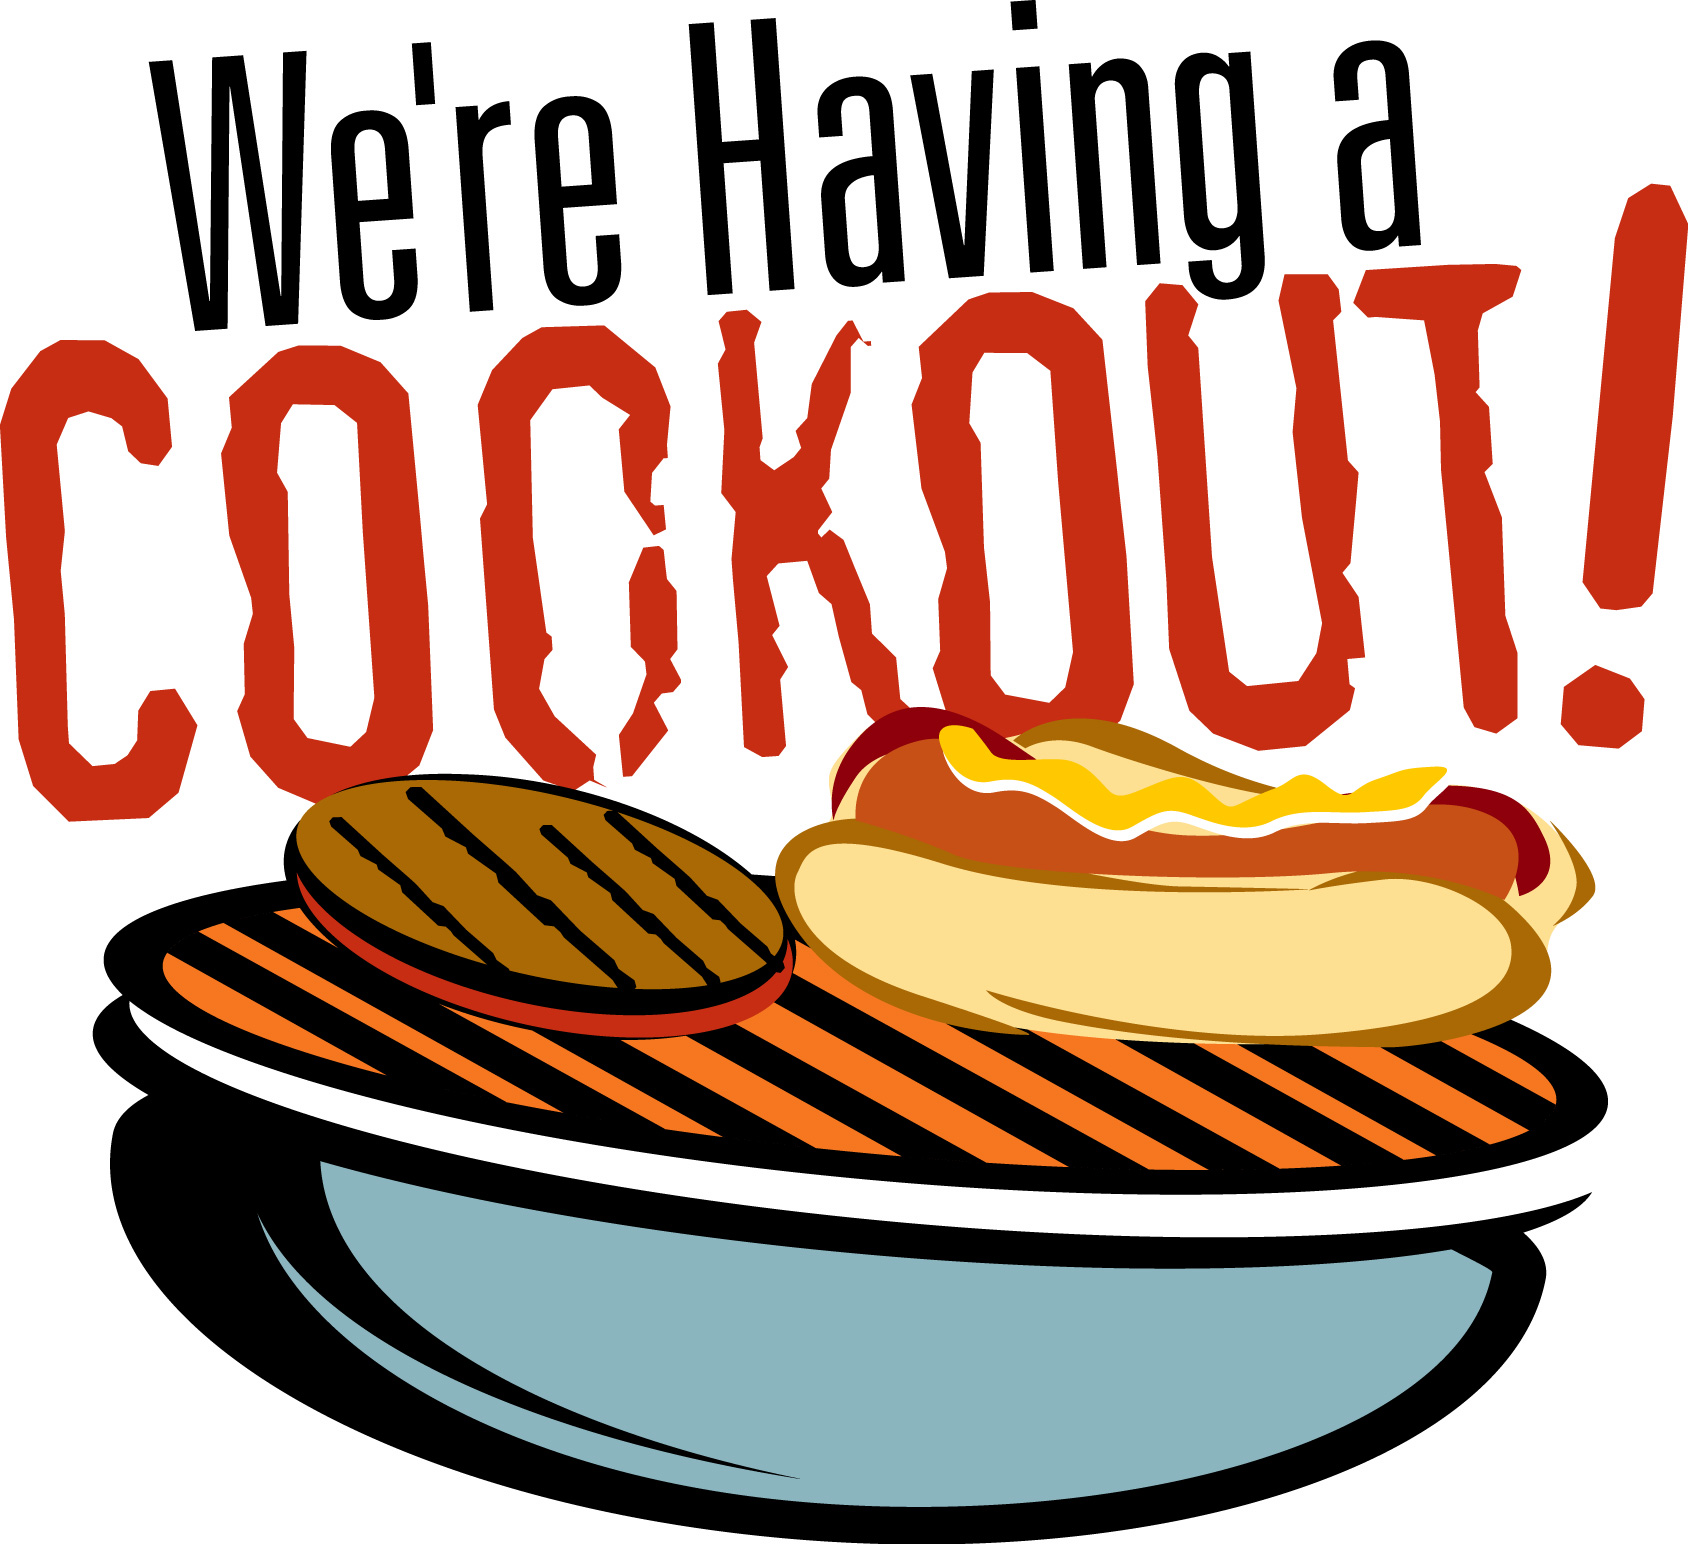 Summer Cookout Clipart Best. 2016/03/14 Summer Cookout u0026middot; Posted Dec 9 2013 4 40 Pm By Dennis Harris Updated Jan 14 2015 1